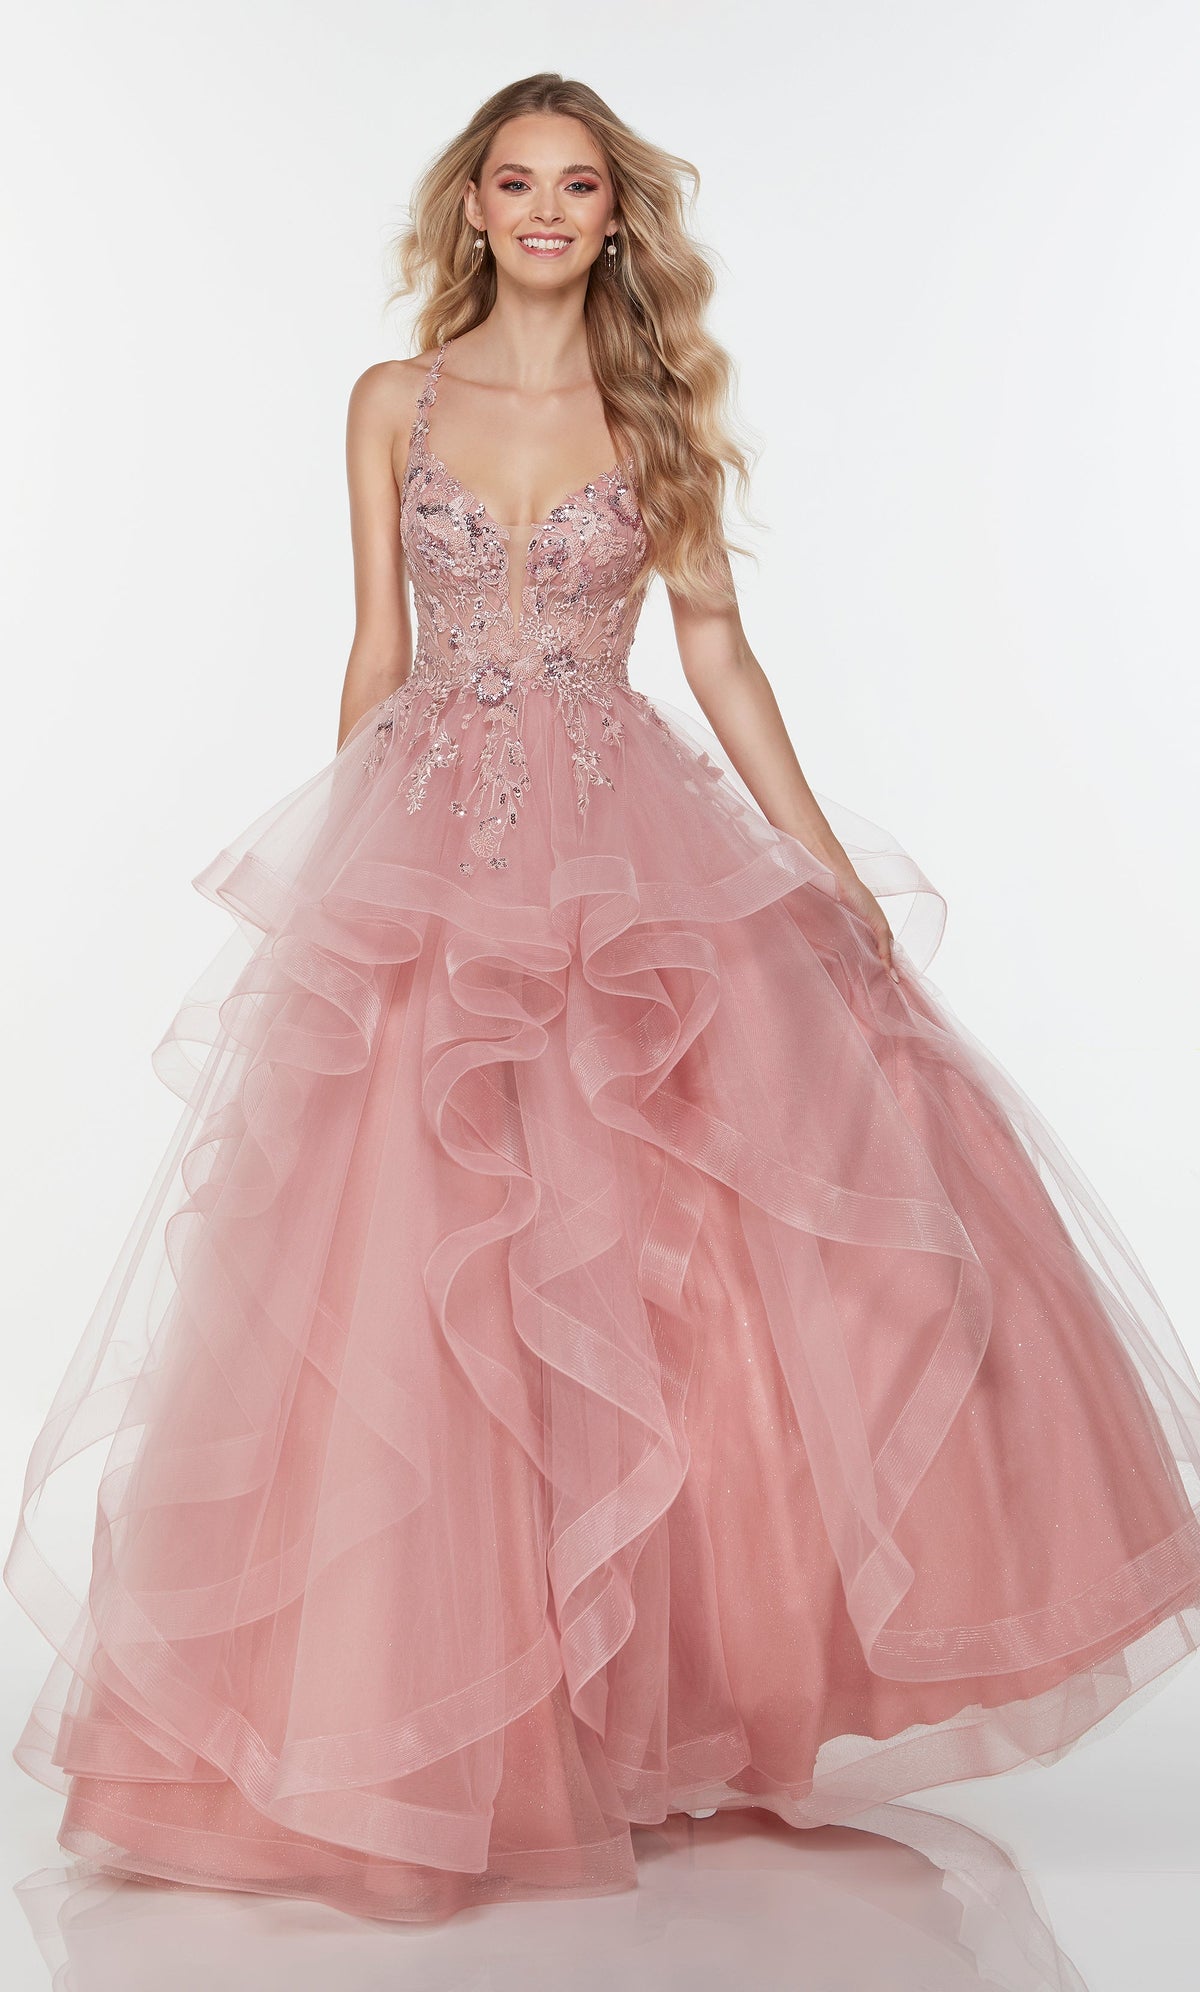 Layered tulle dress with a plunging neckline, sheer bodice, and lace appliques in pink.